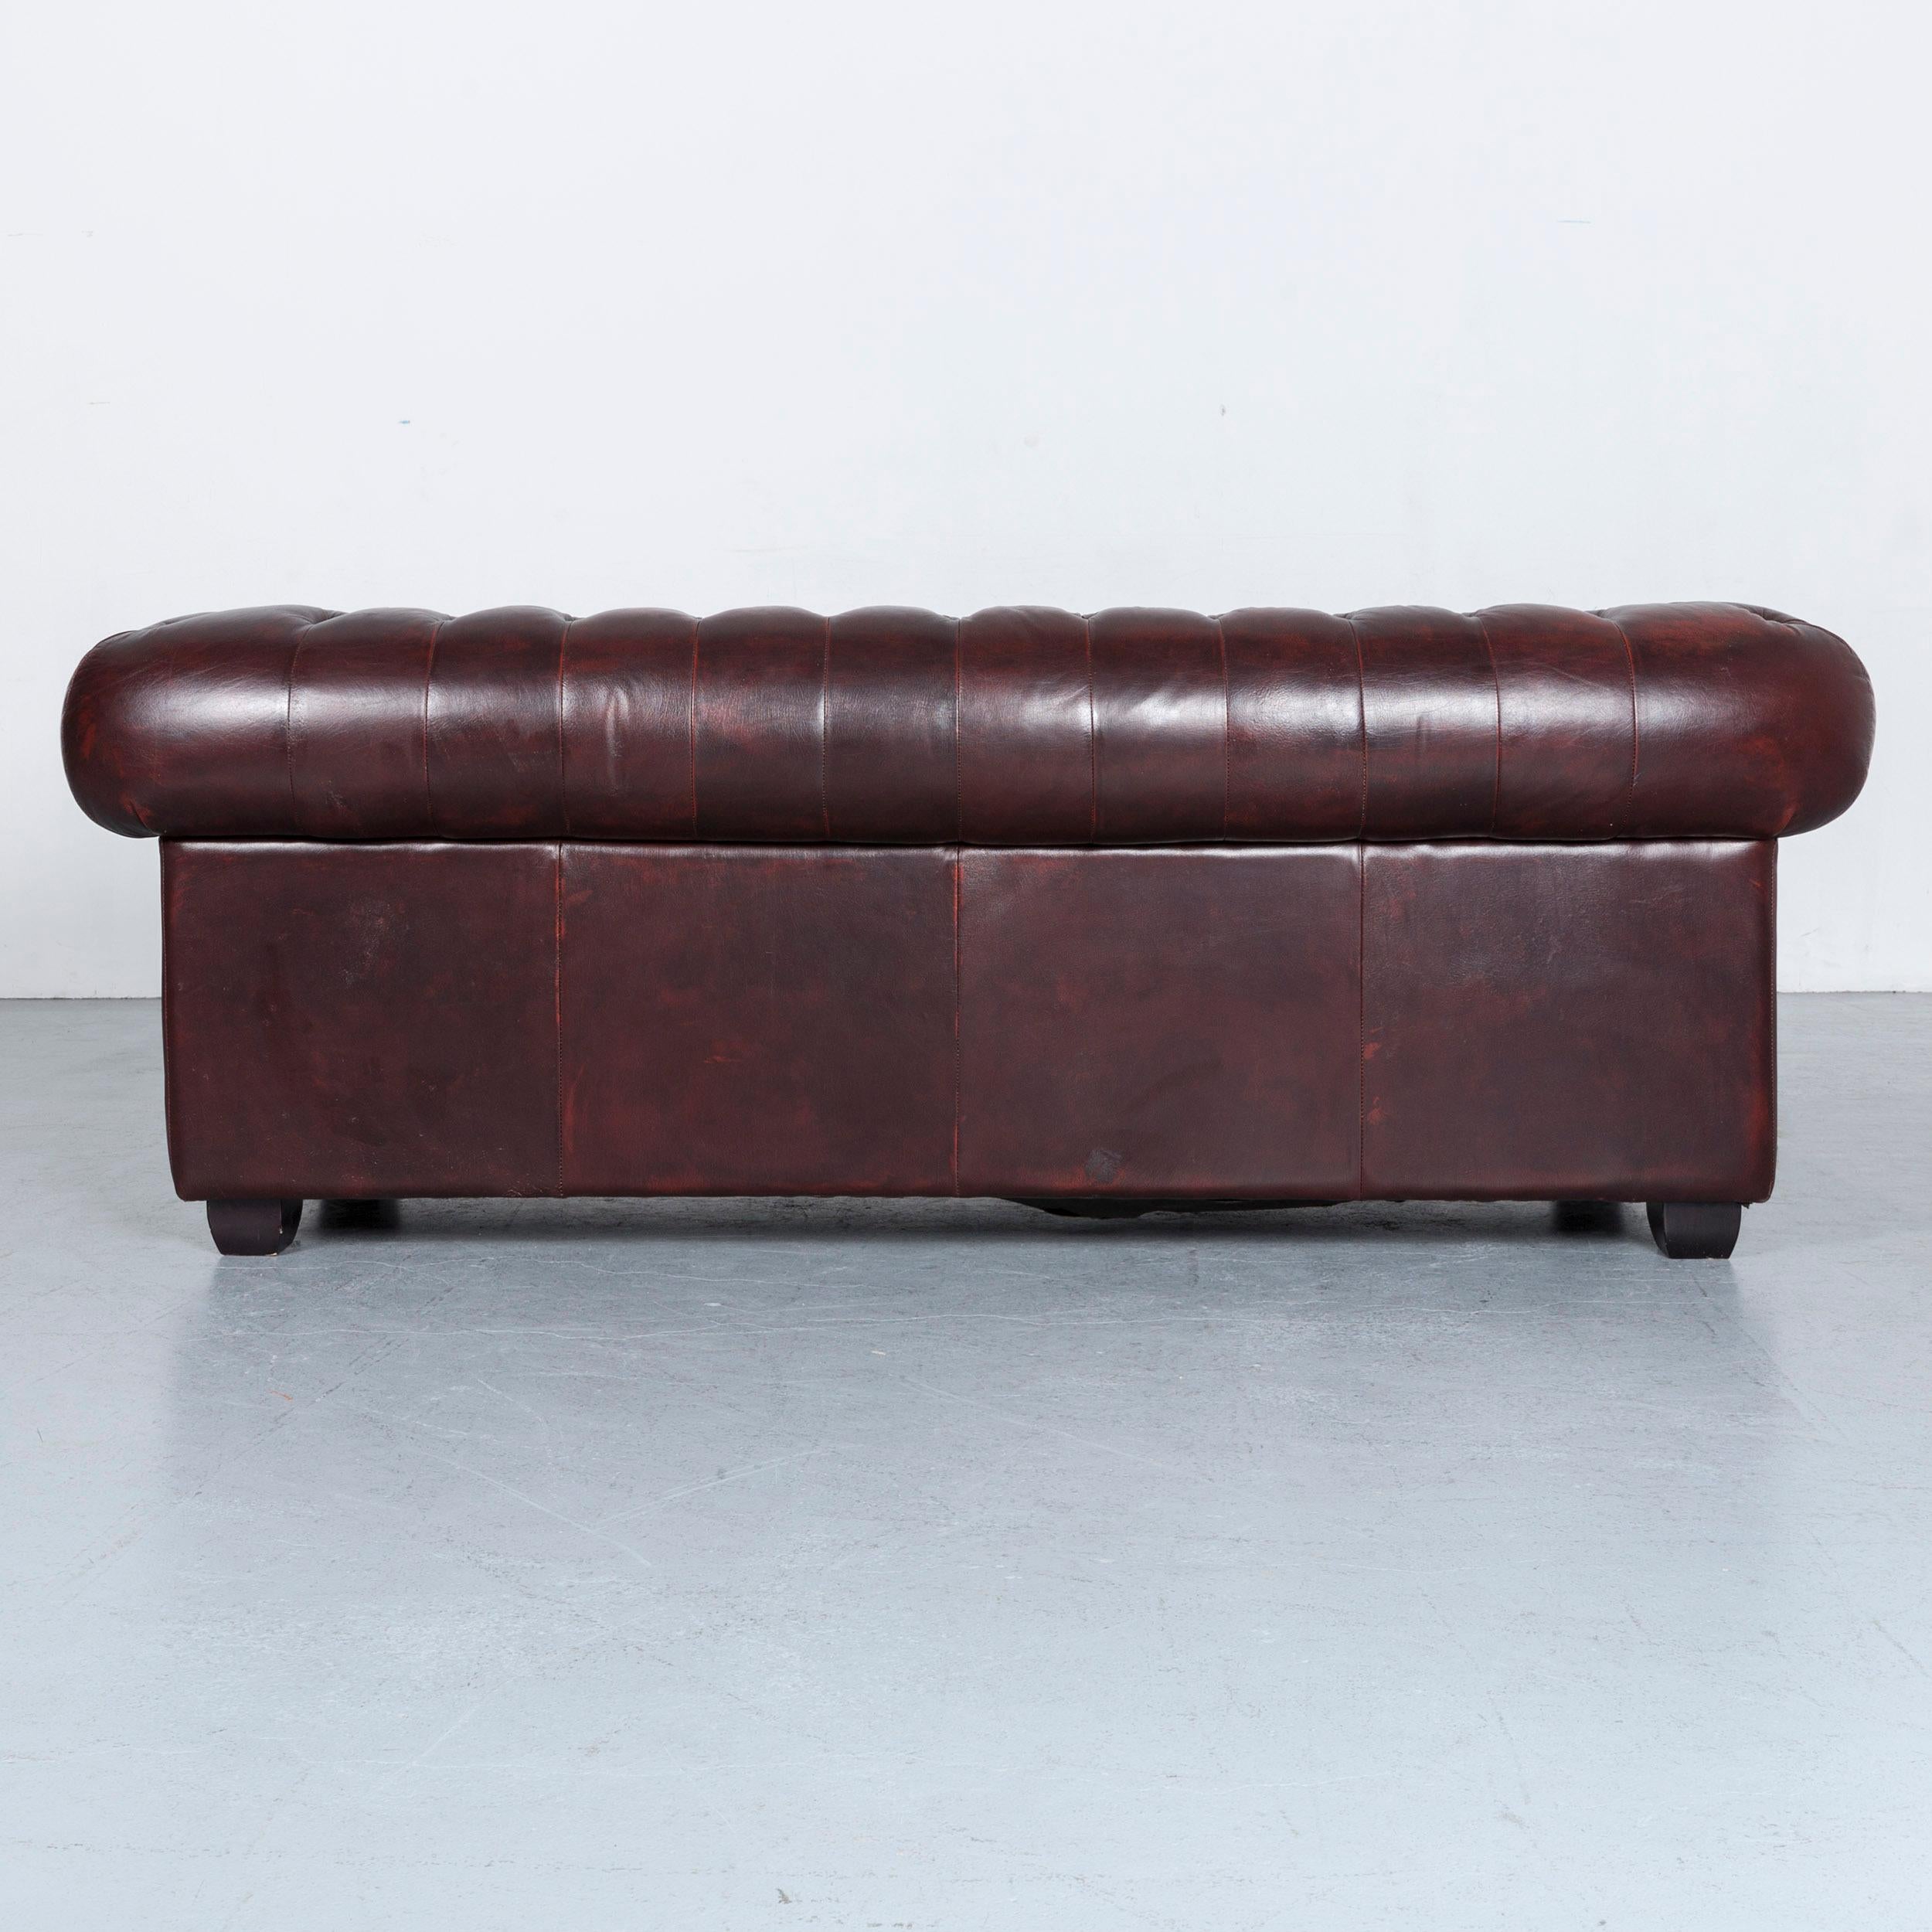 Chesterfield Leather Sofa Brown Three-Seat Couch Vintage Retro 5